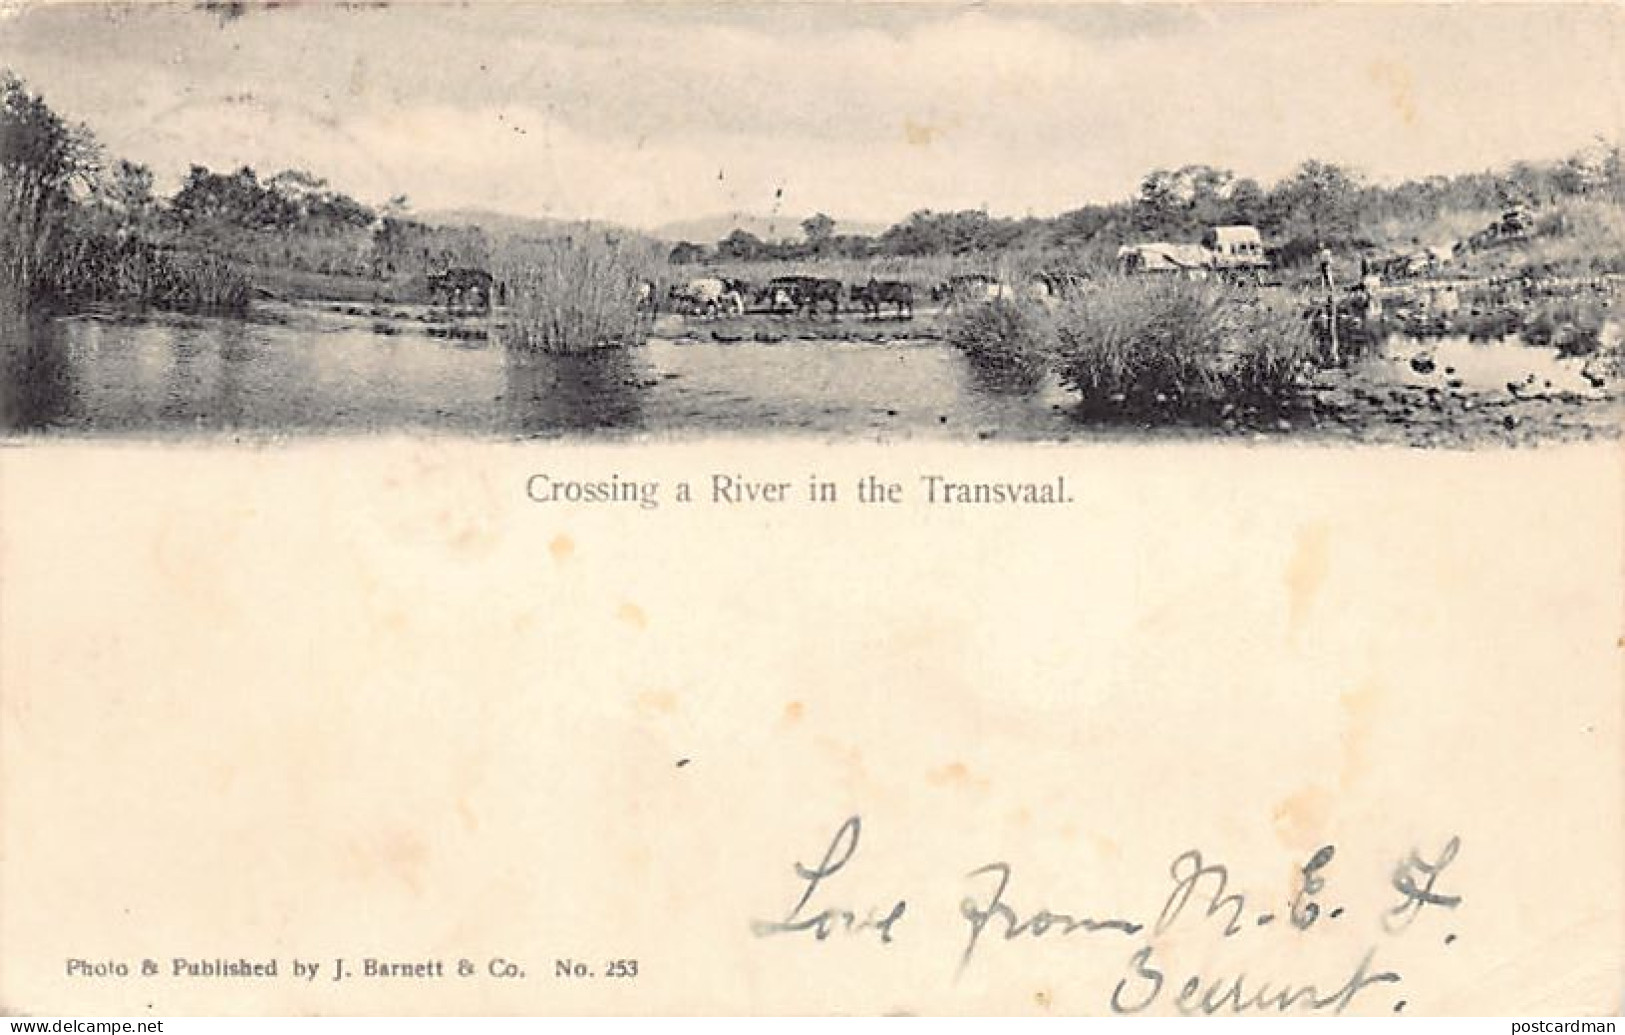 South Africa - Crossing A River In The Transvaal - Publ. J. Barnett & Co. 253 - South Africa